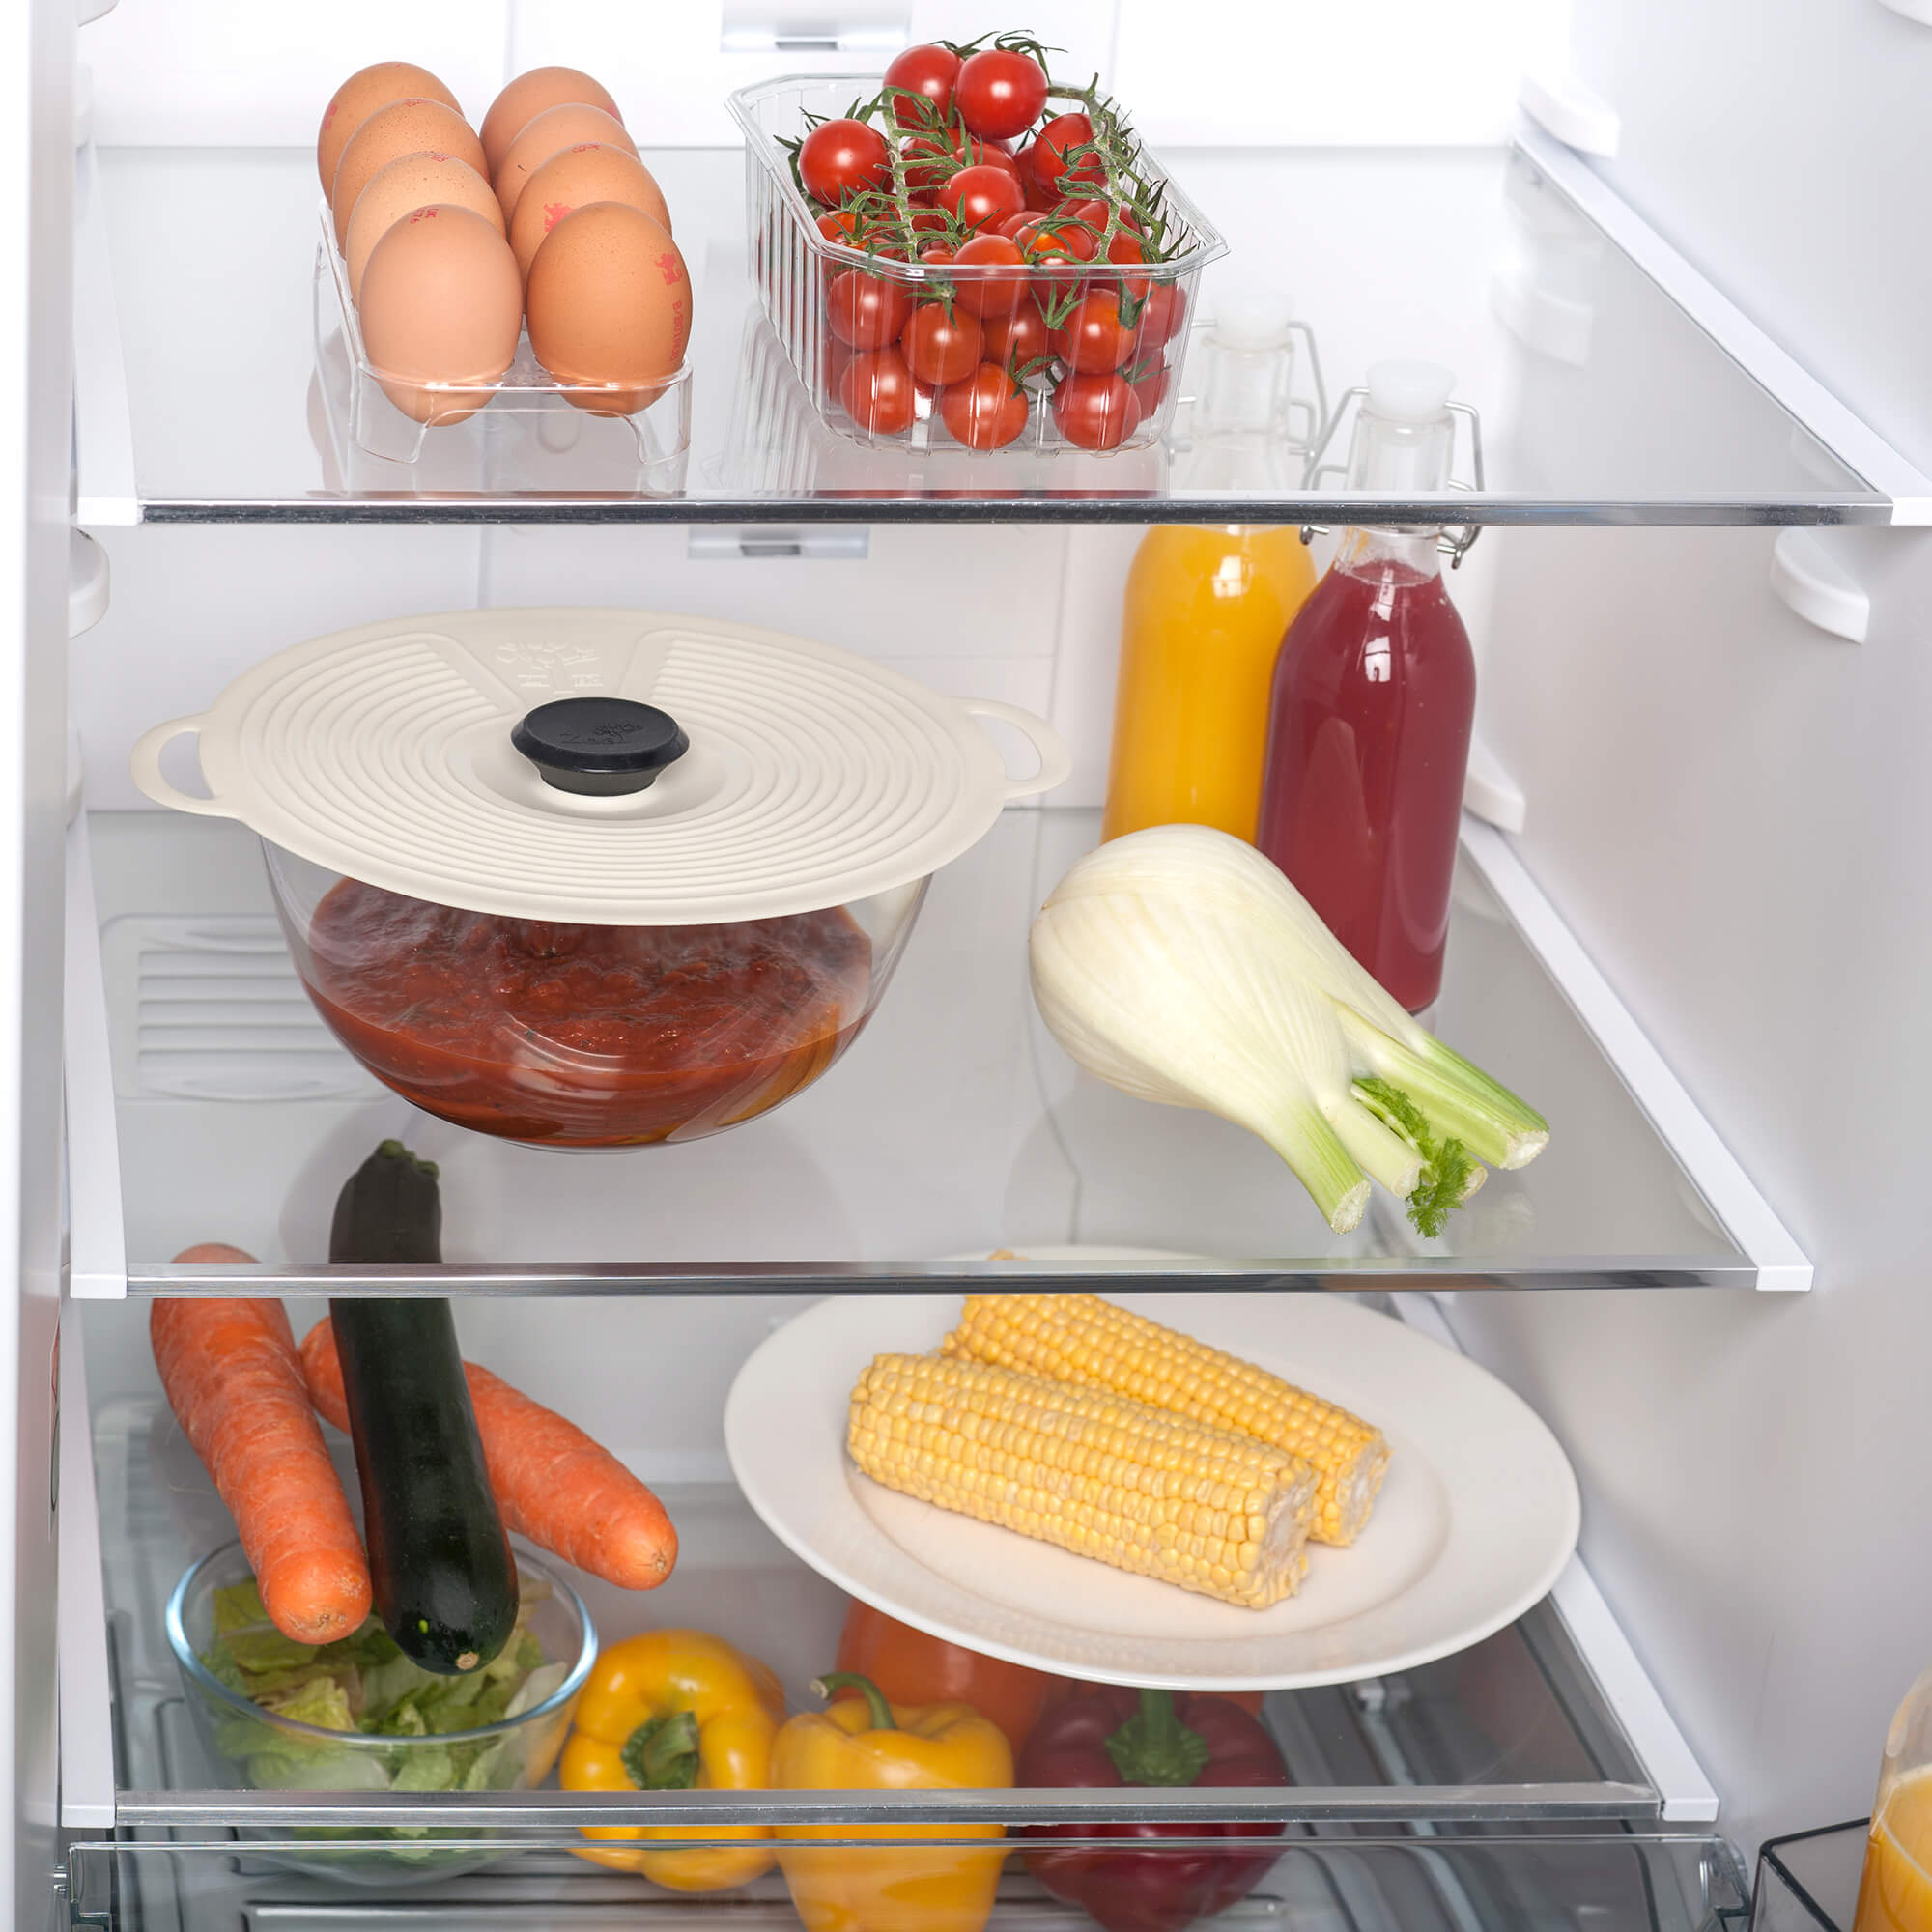 Silicone Self Sealing Lid by Zeal used in a fridge